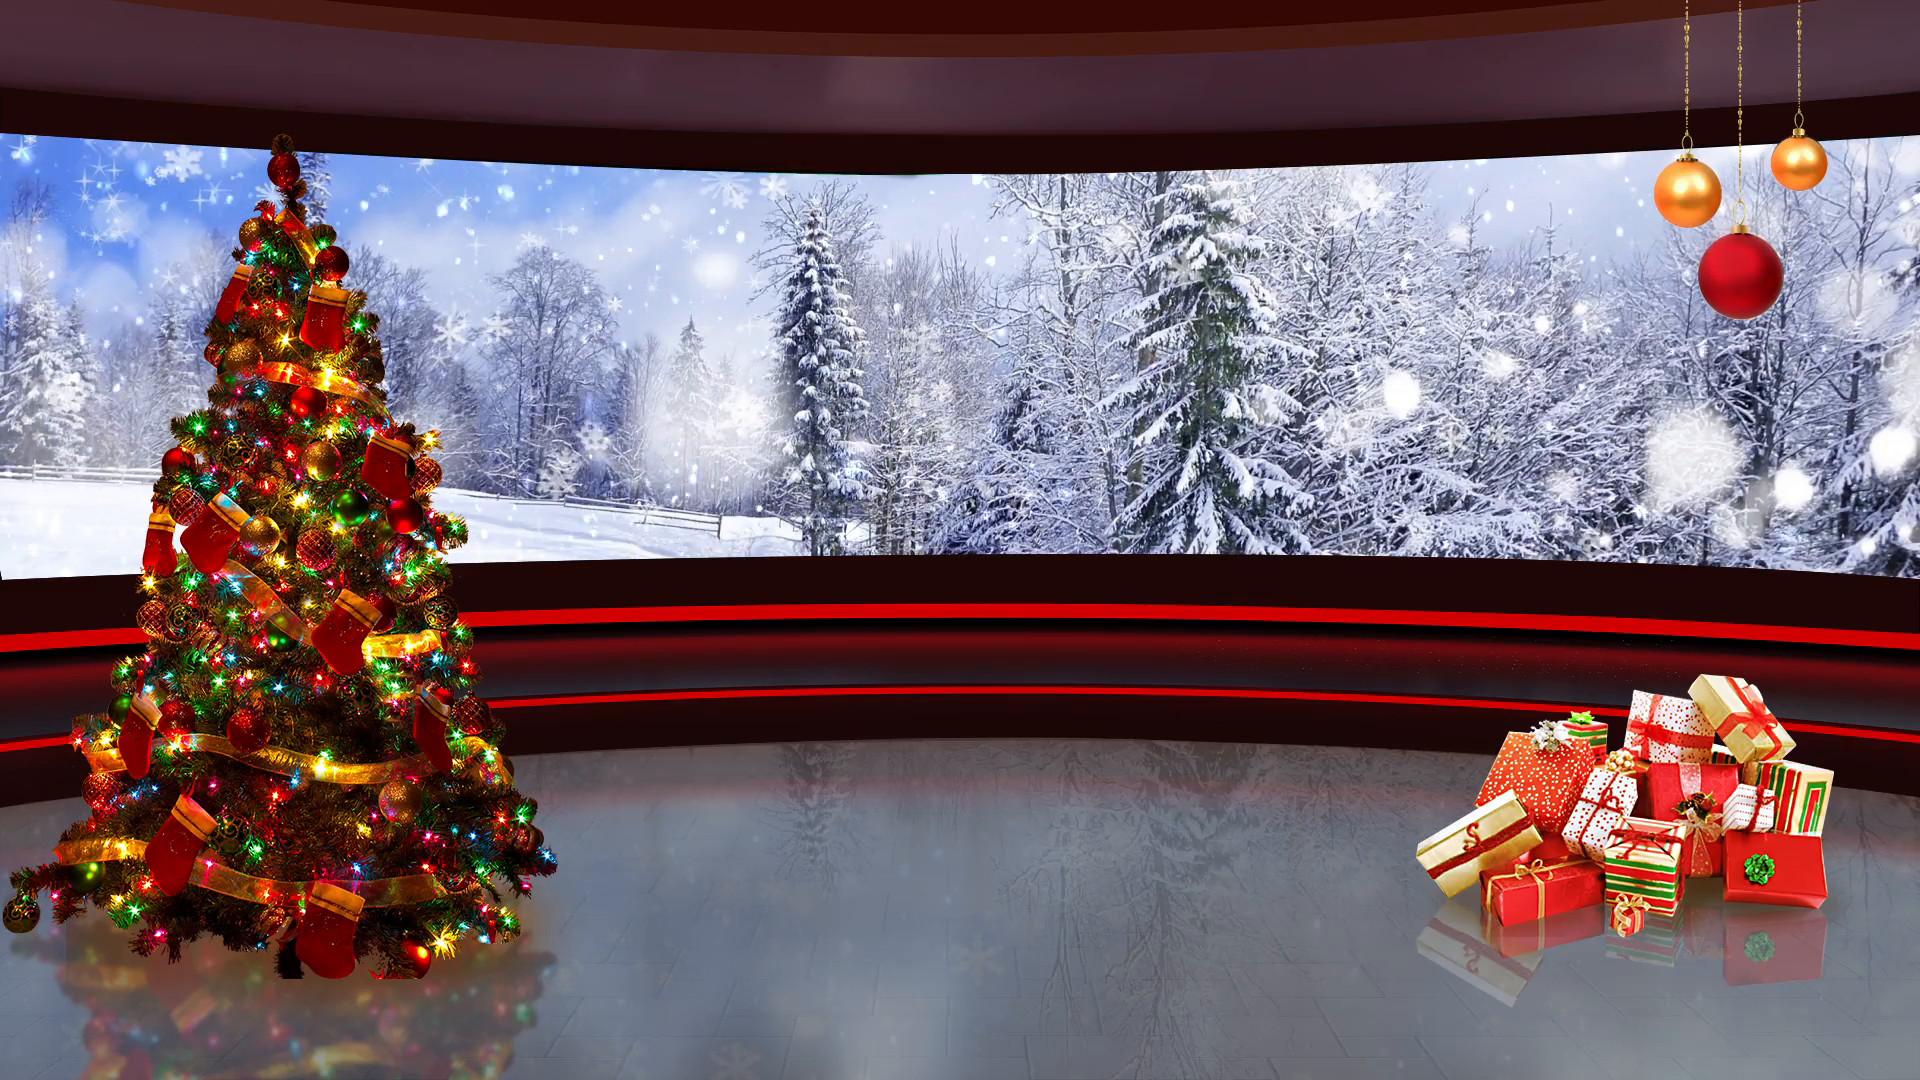 free xmas green screen background images